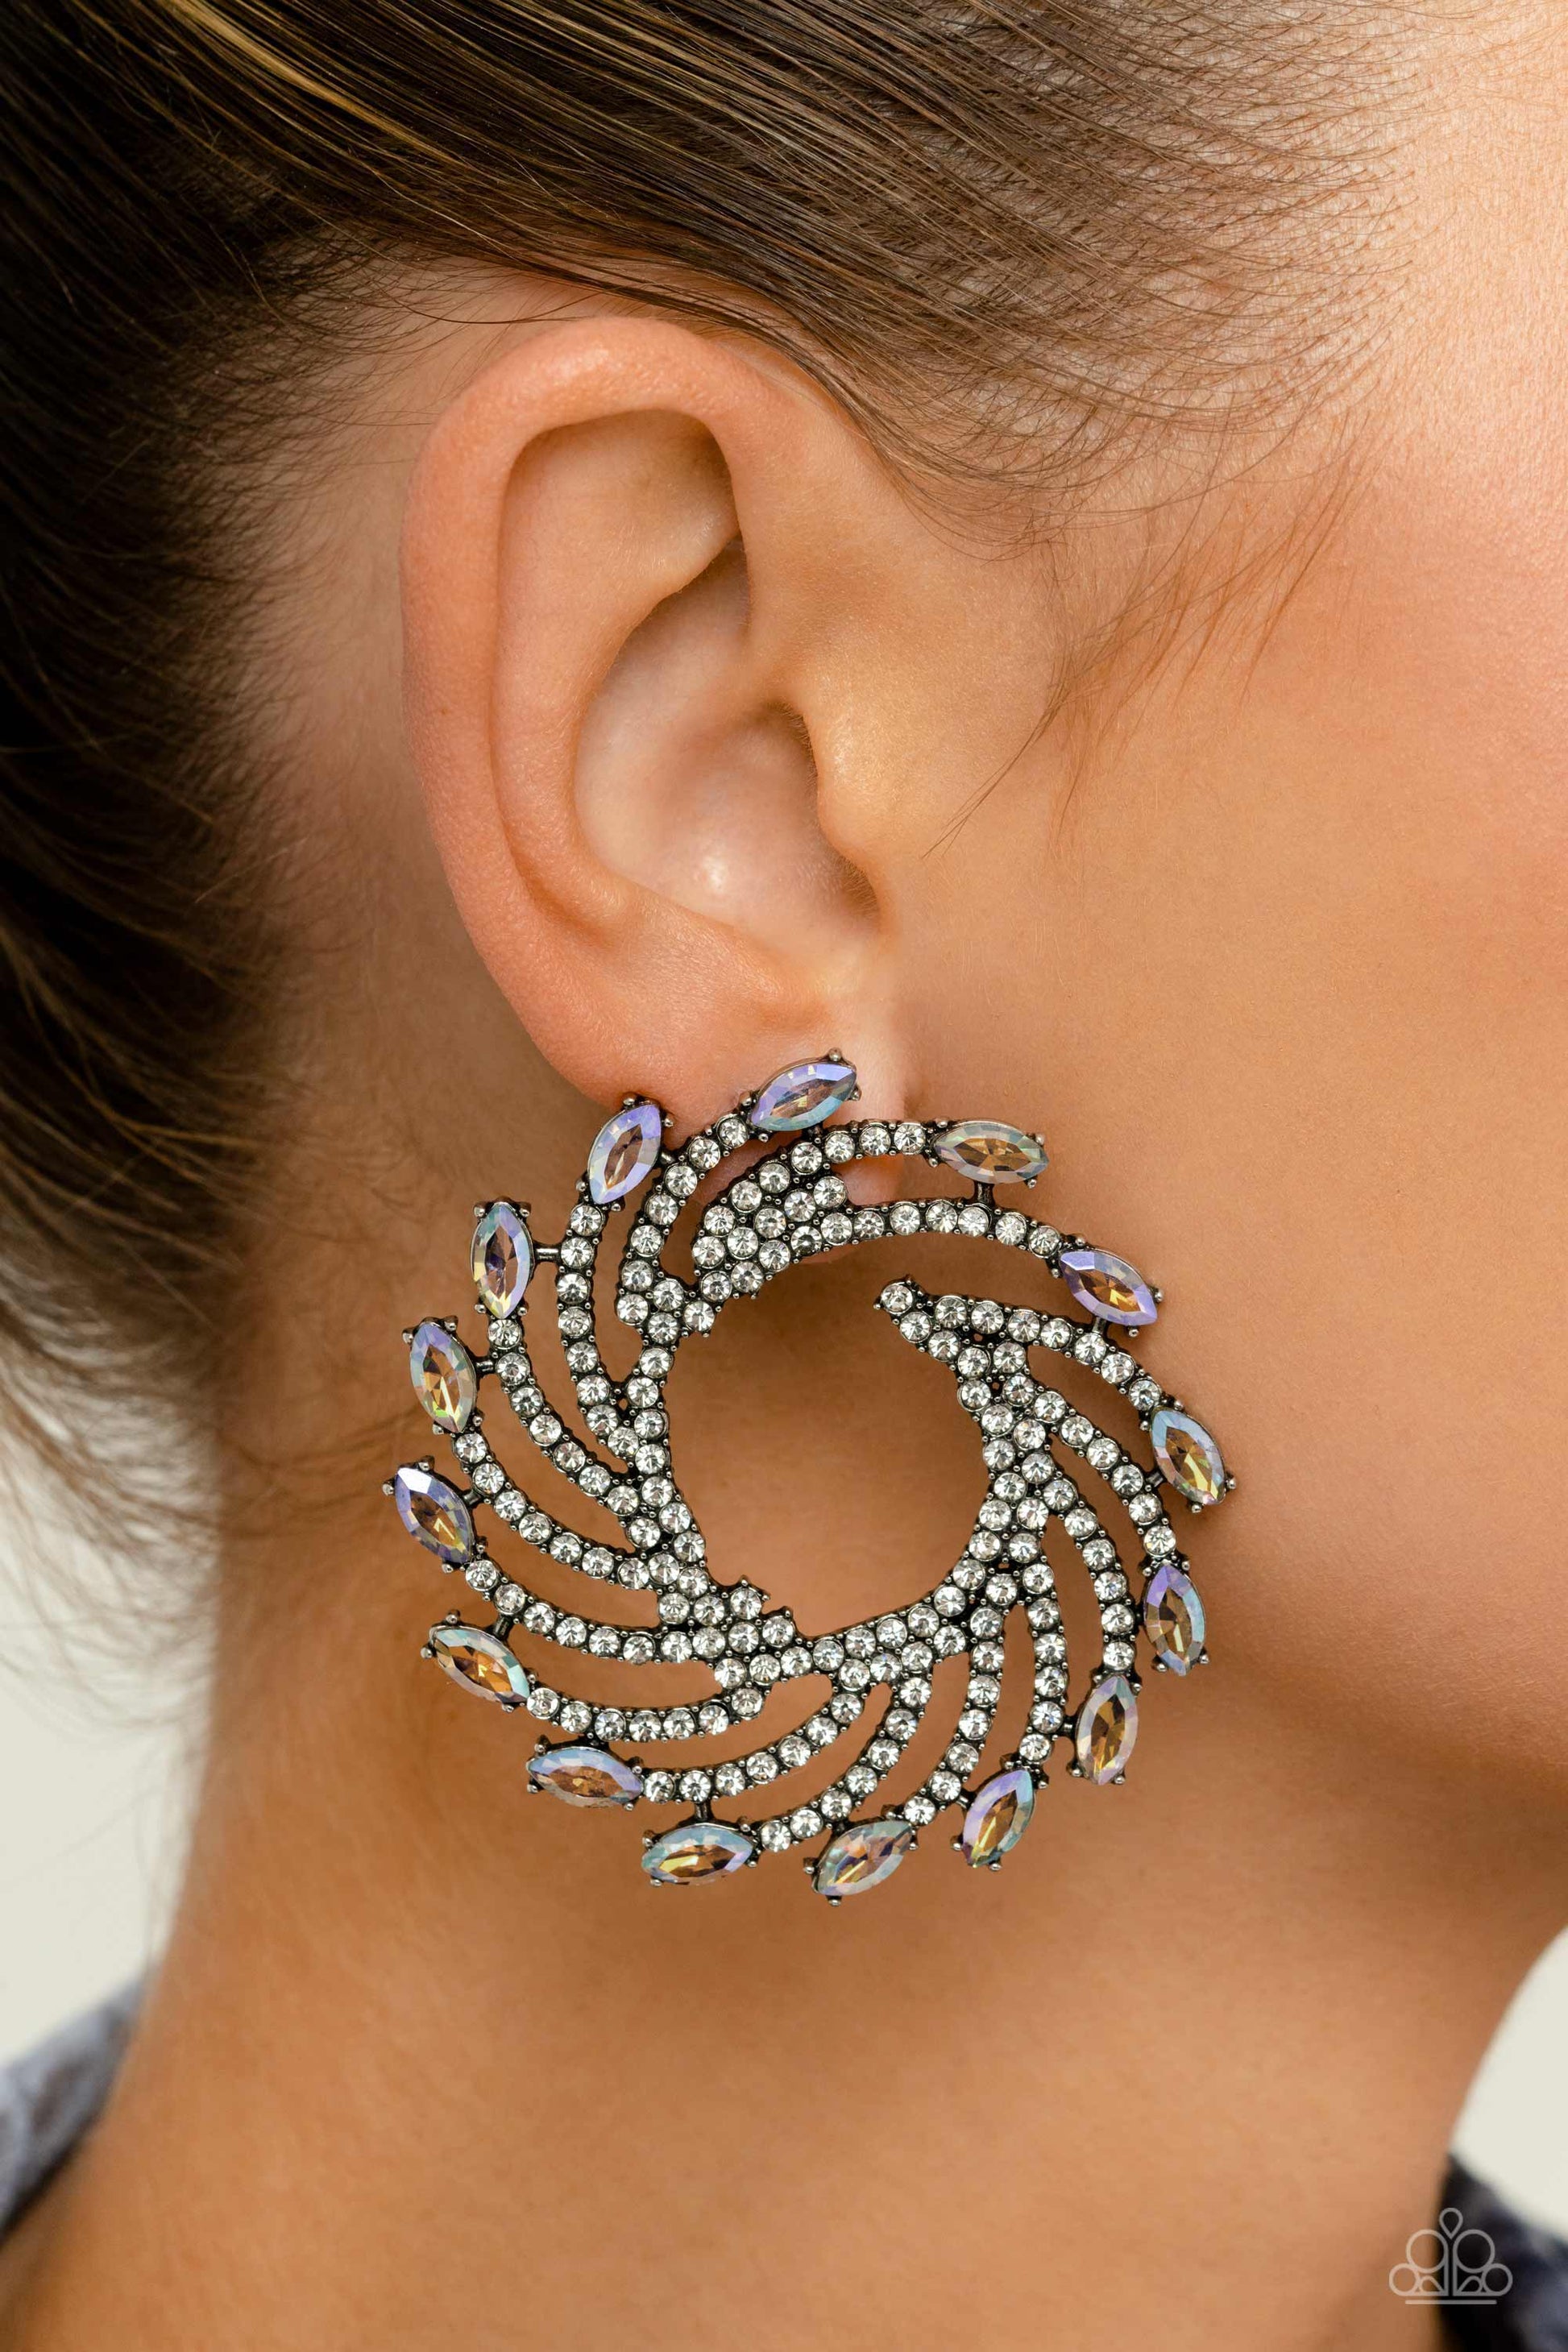 Firework Fanfare Multi Post Earring - Paparazzi Accessories  Shimmery strands of silver spin out from an airy center, creating an exaggerated firework-like display at the ear. An explosion of dainty white rhinestones lines the swirls and curves of the shimmery display leading the eye to the collection of colorfully reflective marquise-cut gems at its ends. Each colorfully reflective marquise-cut gem curls around the ear in a clock-like manner, creating additional eye-catching dimension. P5PO-MTXX-099XX